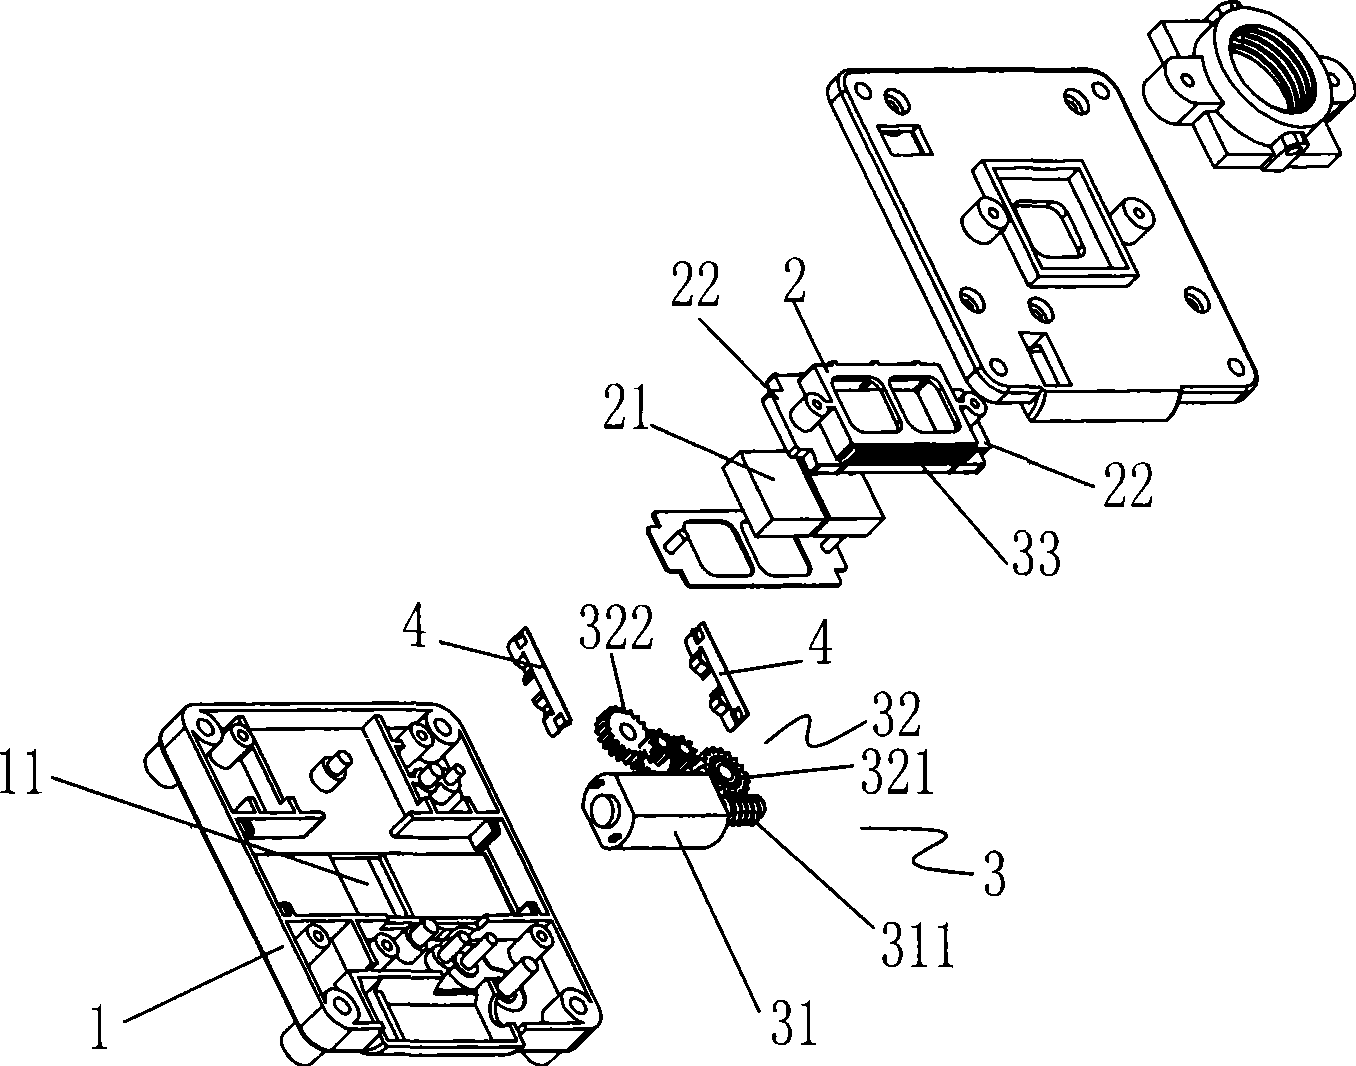 Automatic switching device for optical filter of camera head